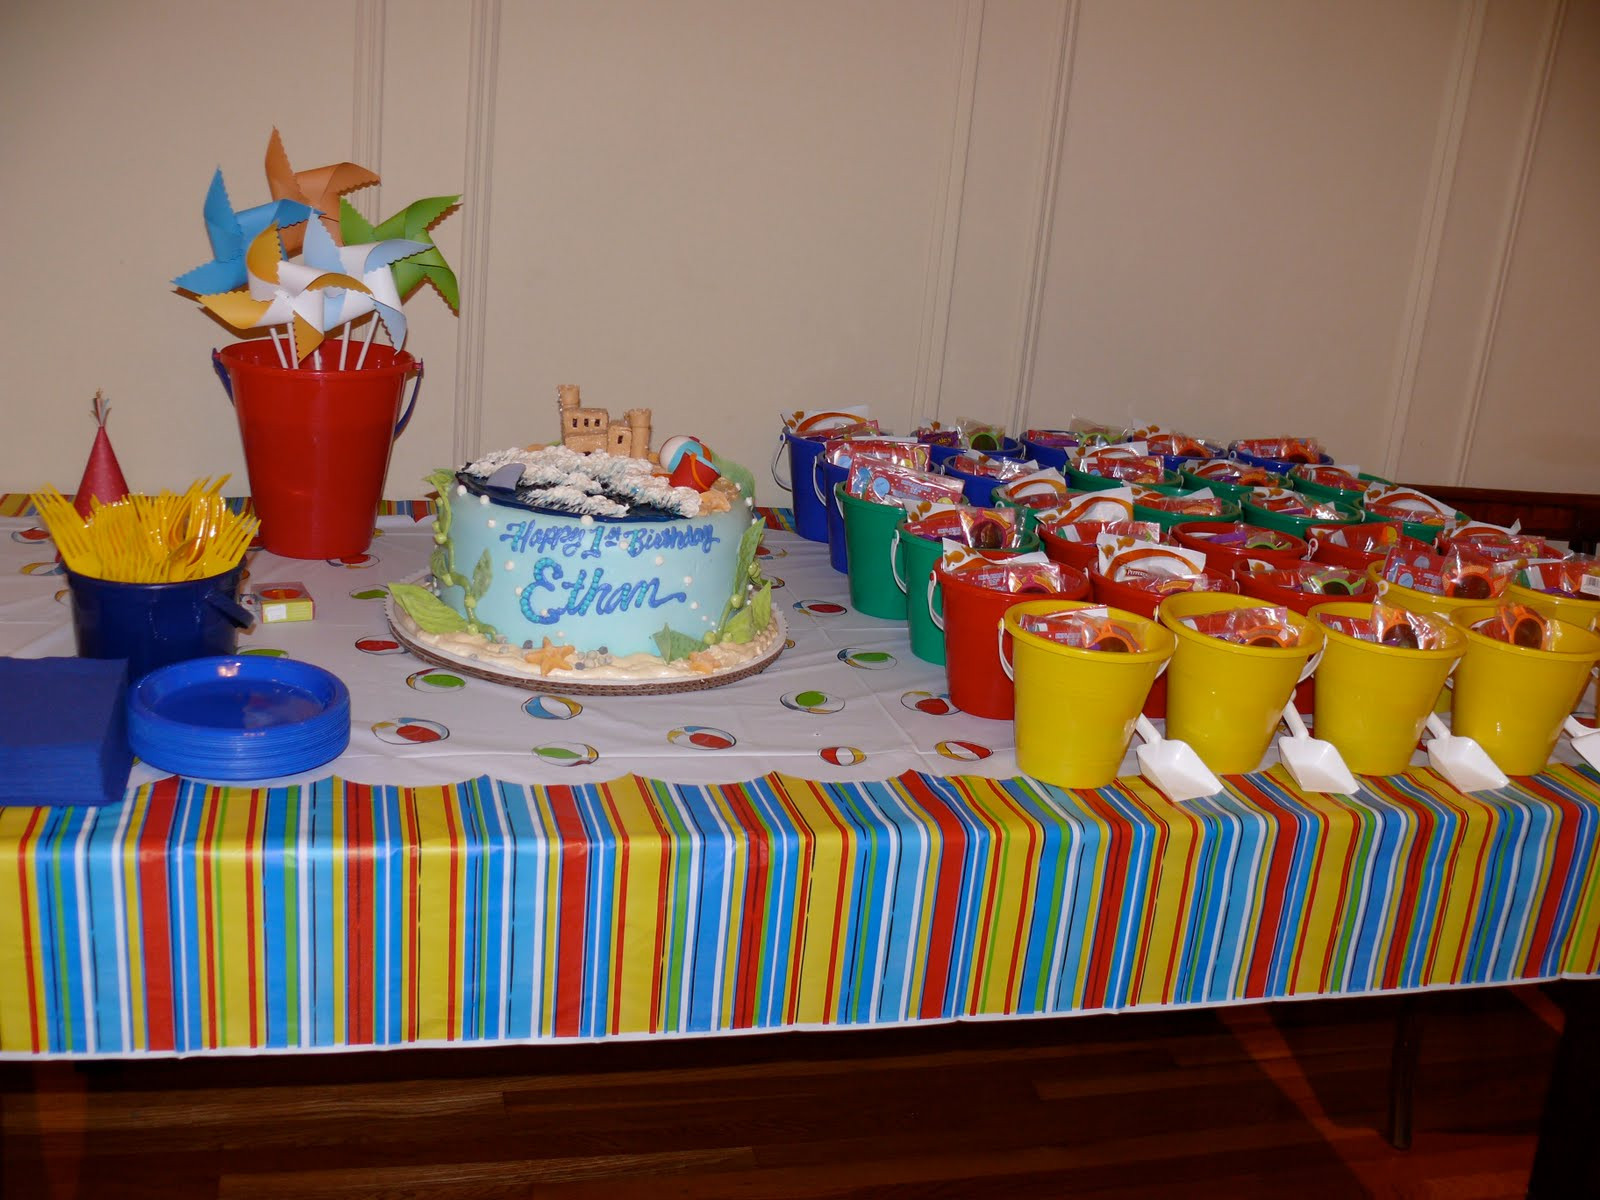 Kids Beach Party Theme Ideas
 Stylish Childrens Parties Beach First Birthday Party